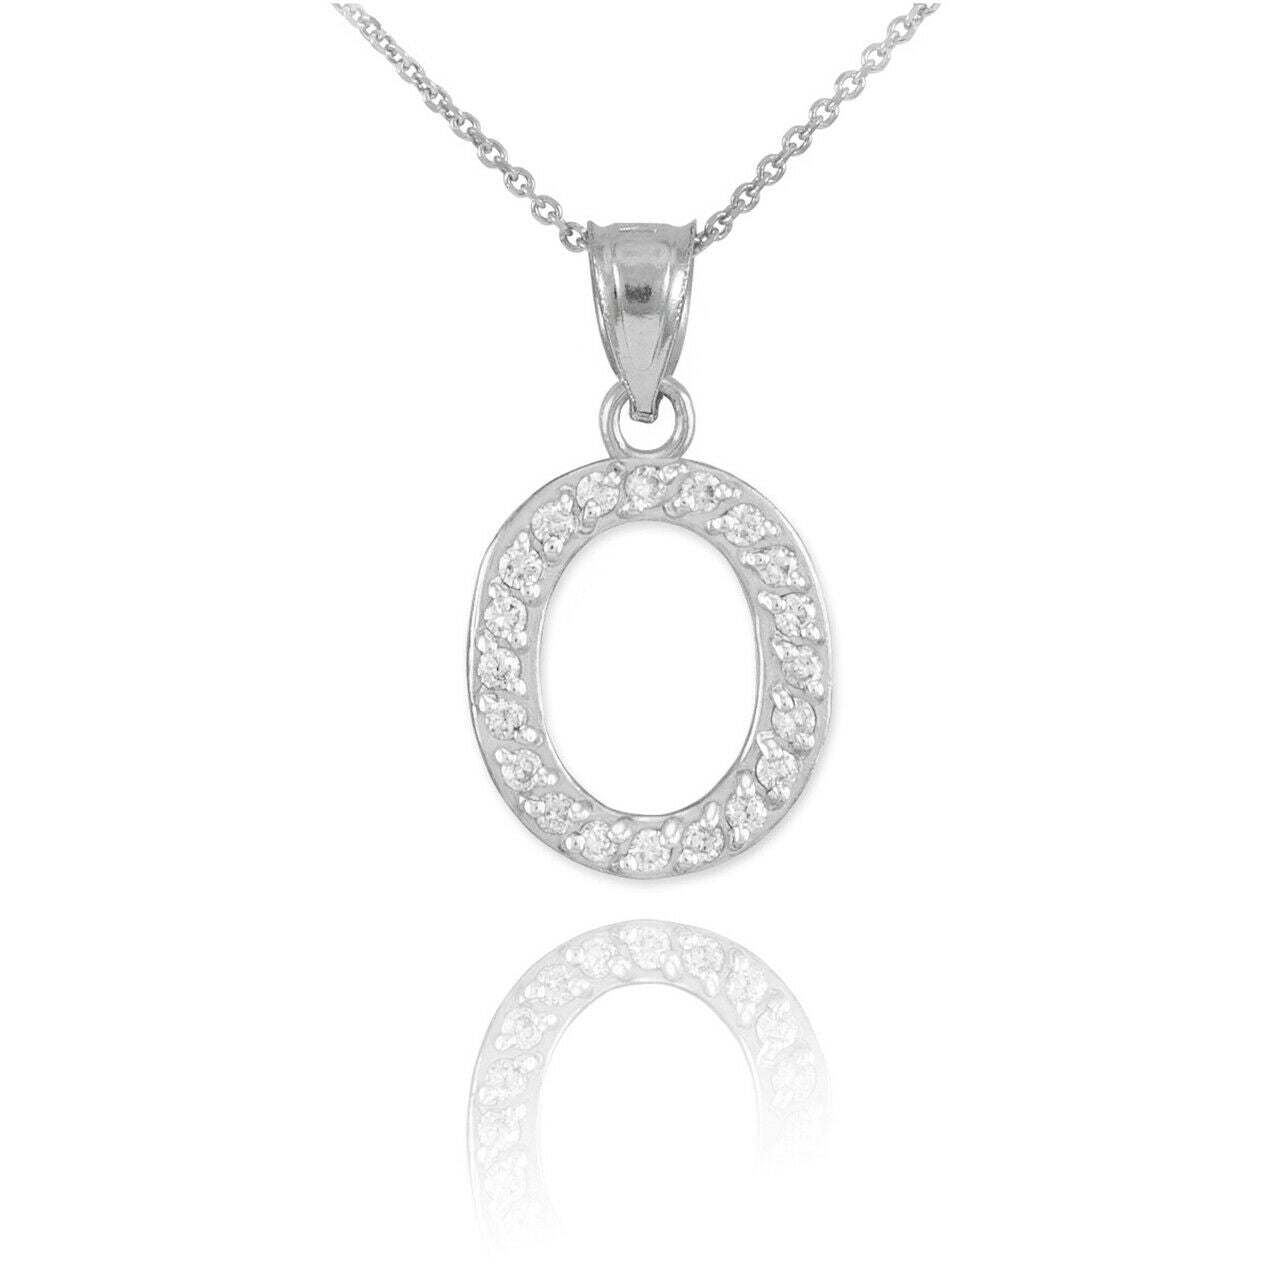 925 Sterling Silver Letter "O" Initial CZ Monogram Pendant Necklace 16 18 20 22"